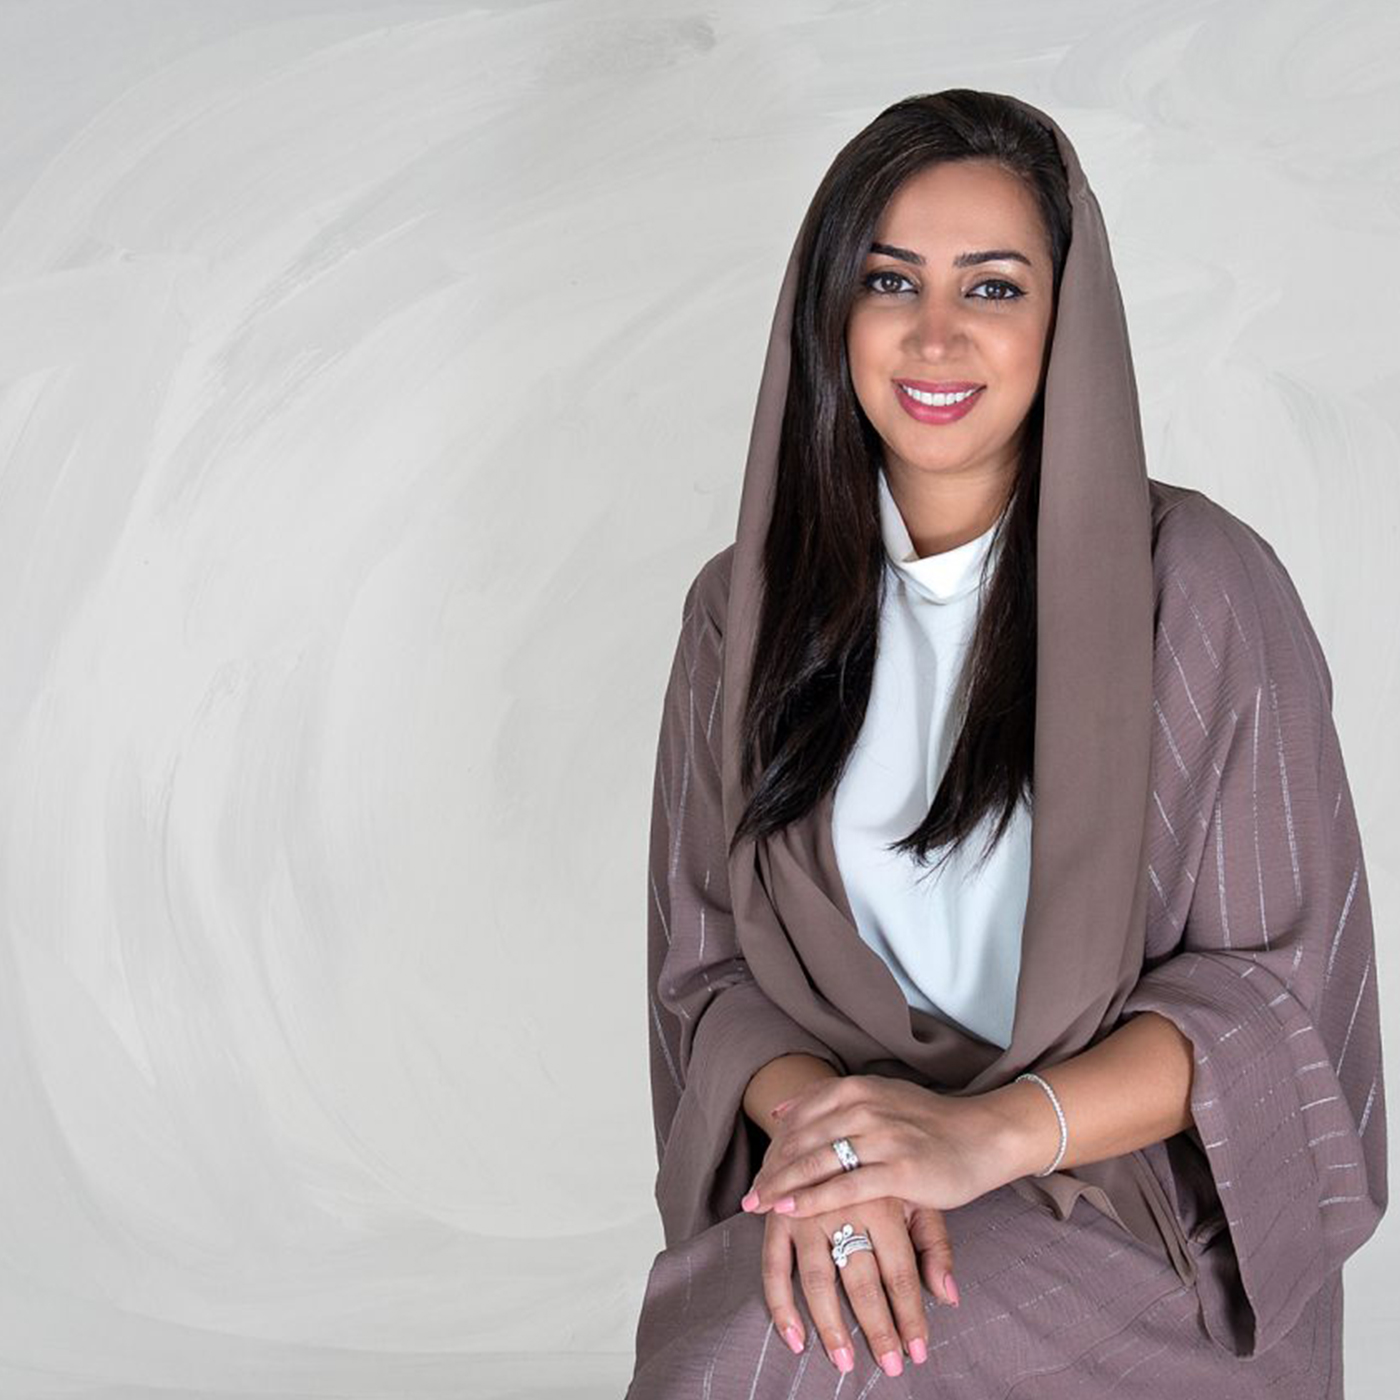 Khawla Hammad, founder and CEO of Takalam, a UAE-based online Arabic counselling service